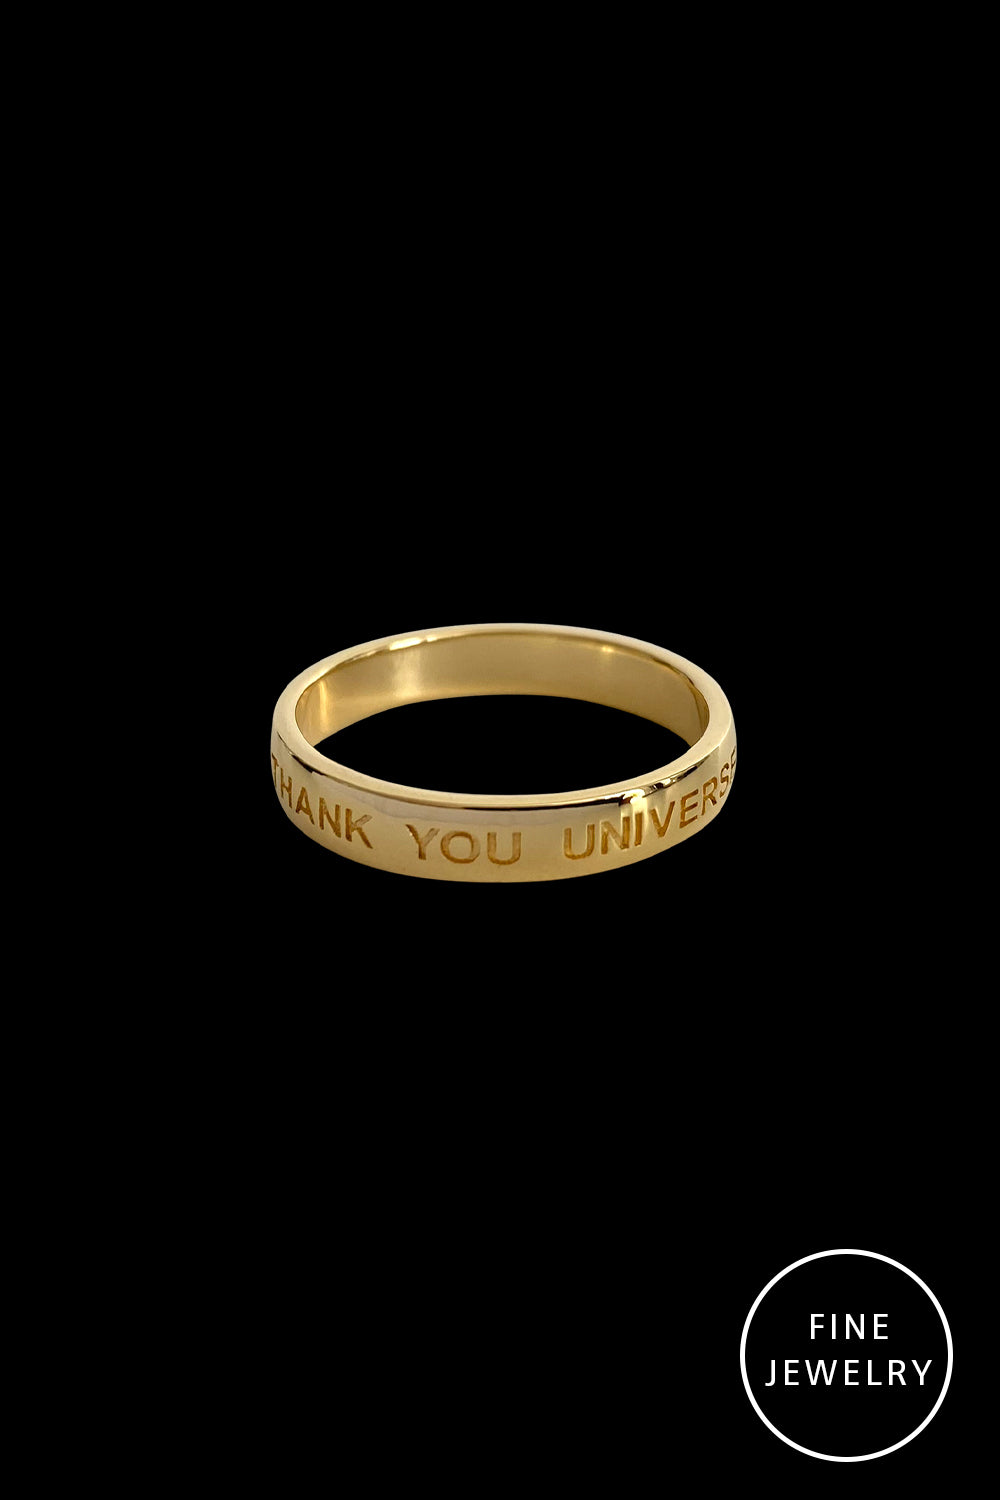 ECHTSCHMUCK - THANK YOU UNIVERSE SIMPLE - Gold Ring